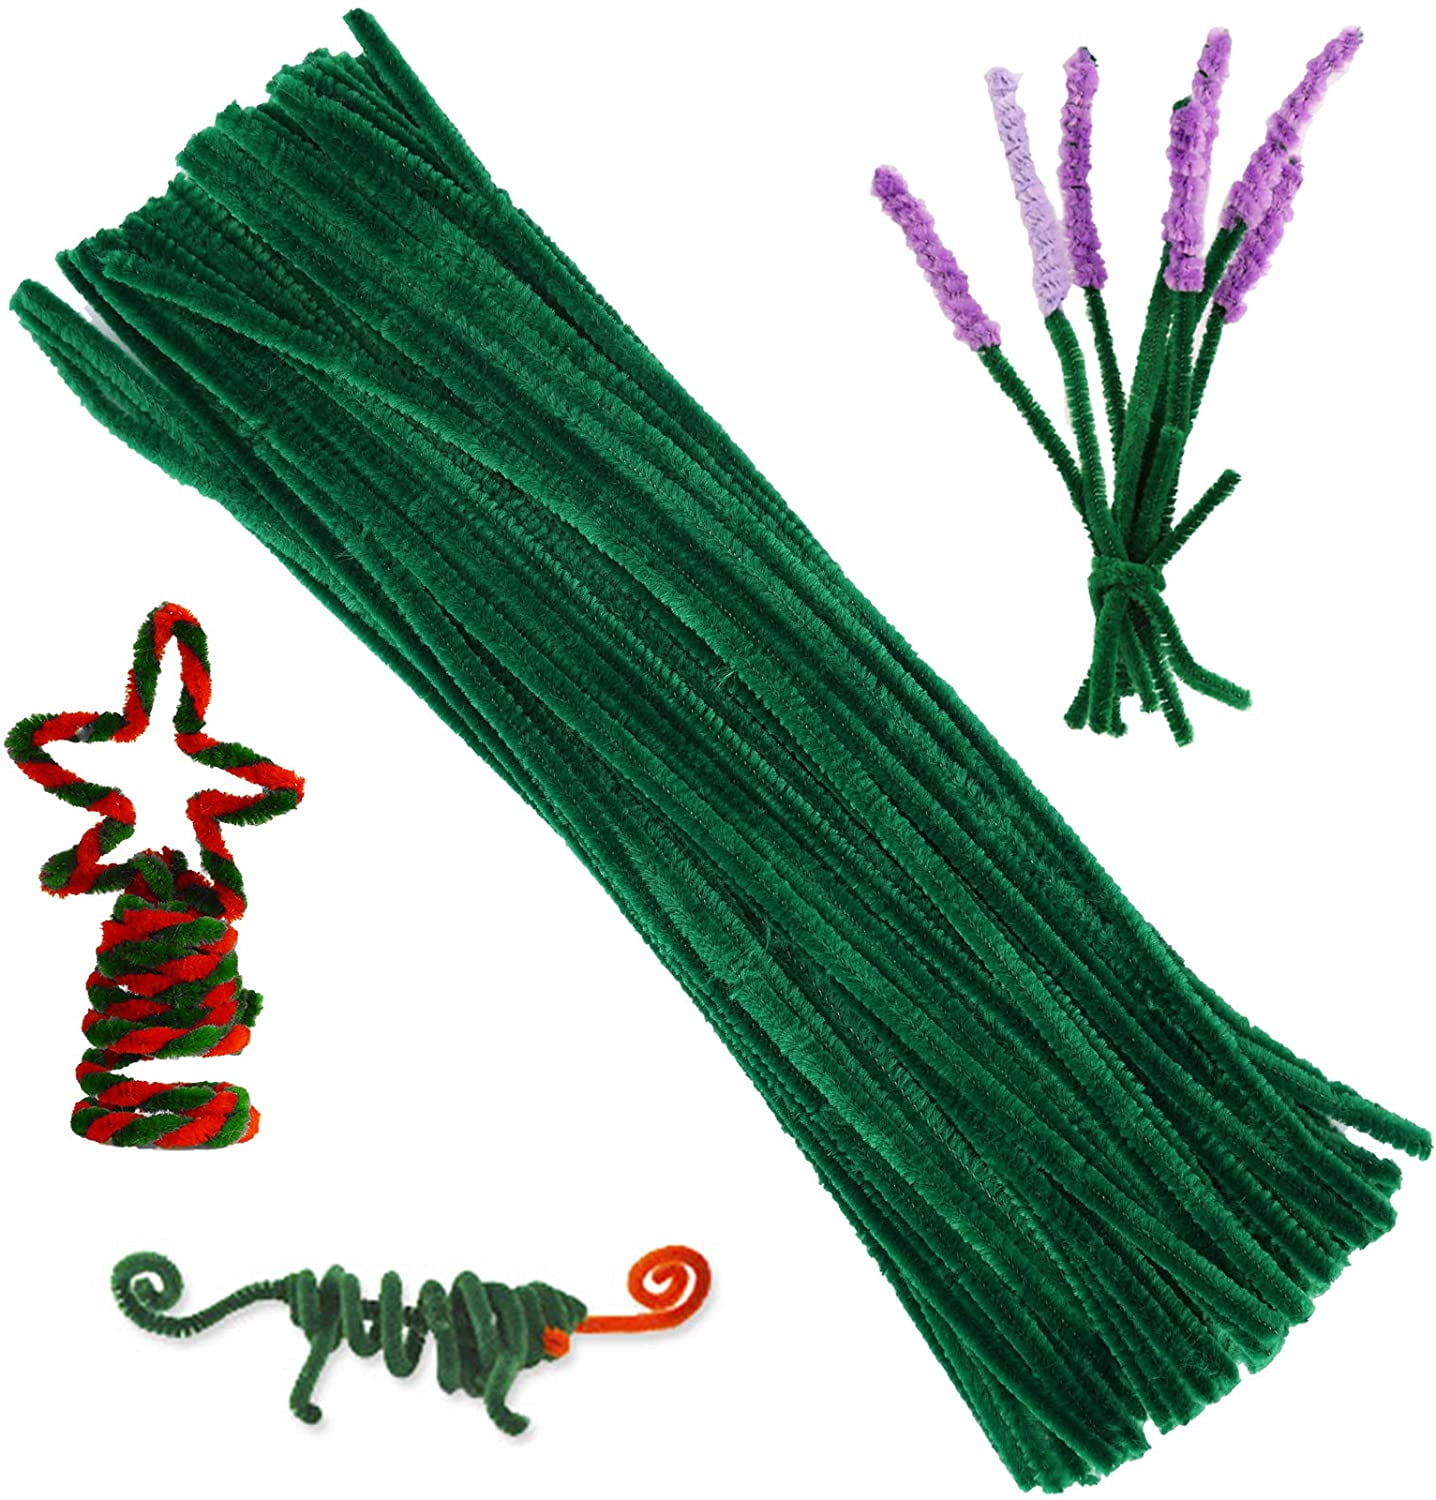 EXTRIC Pipe Cleaners- 100pc. Pipe Cleaner Red Pipe Cleaners-Chenille Stems, Pipe Cleaners Craft, Fuzzy Sticks Great Craft Supplies DIY Art & Craft Projects